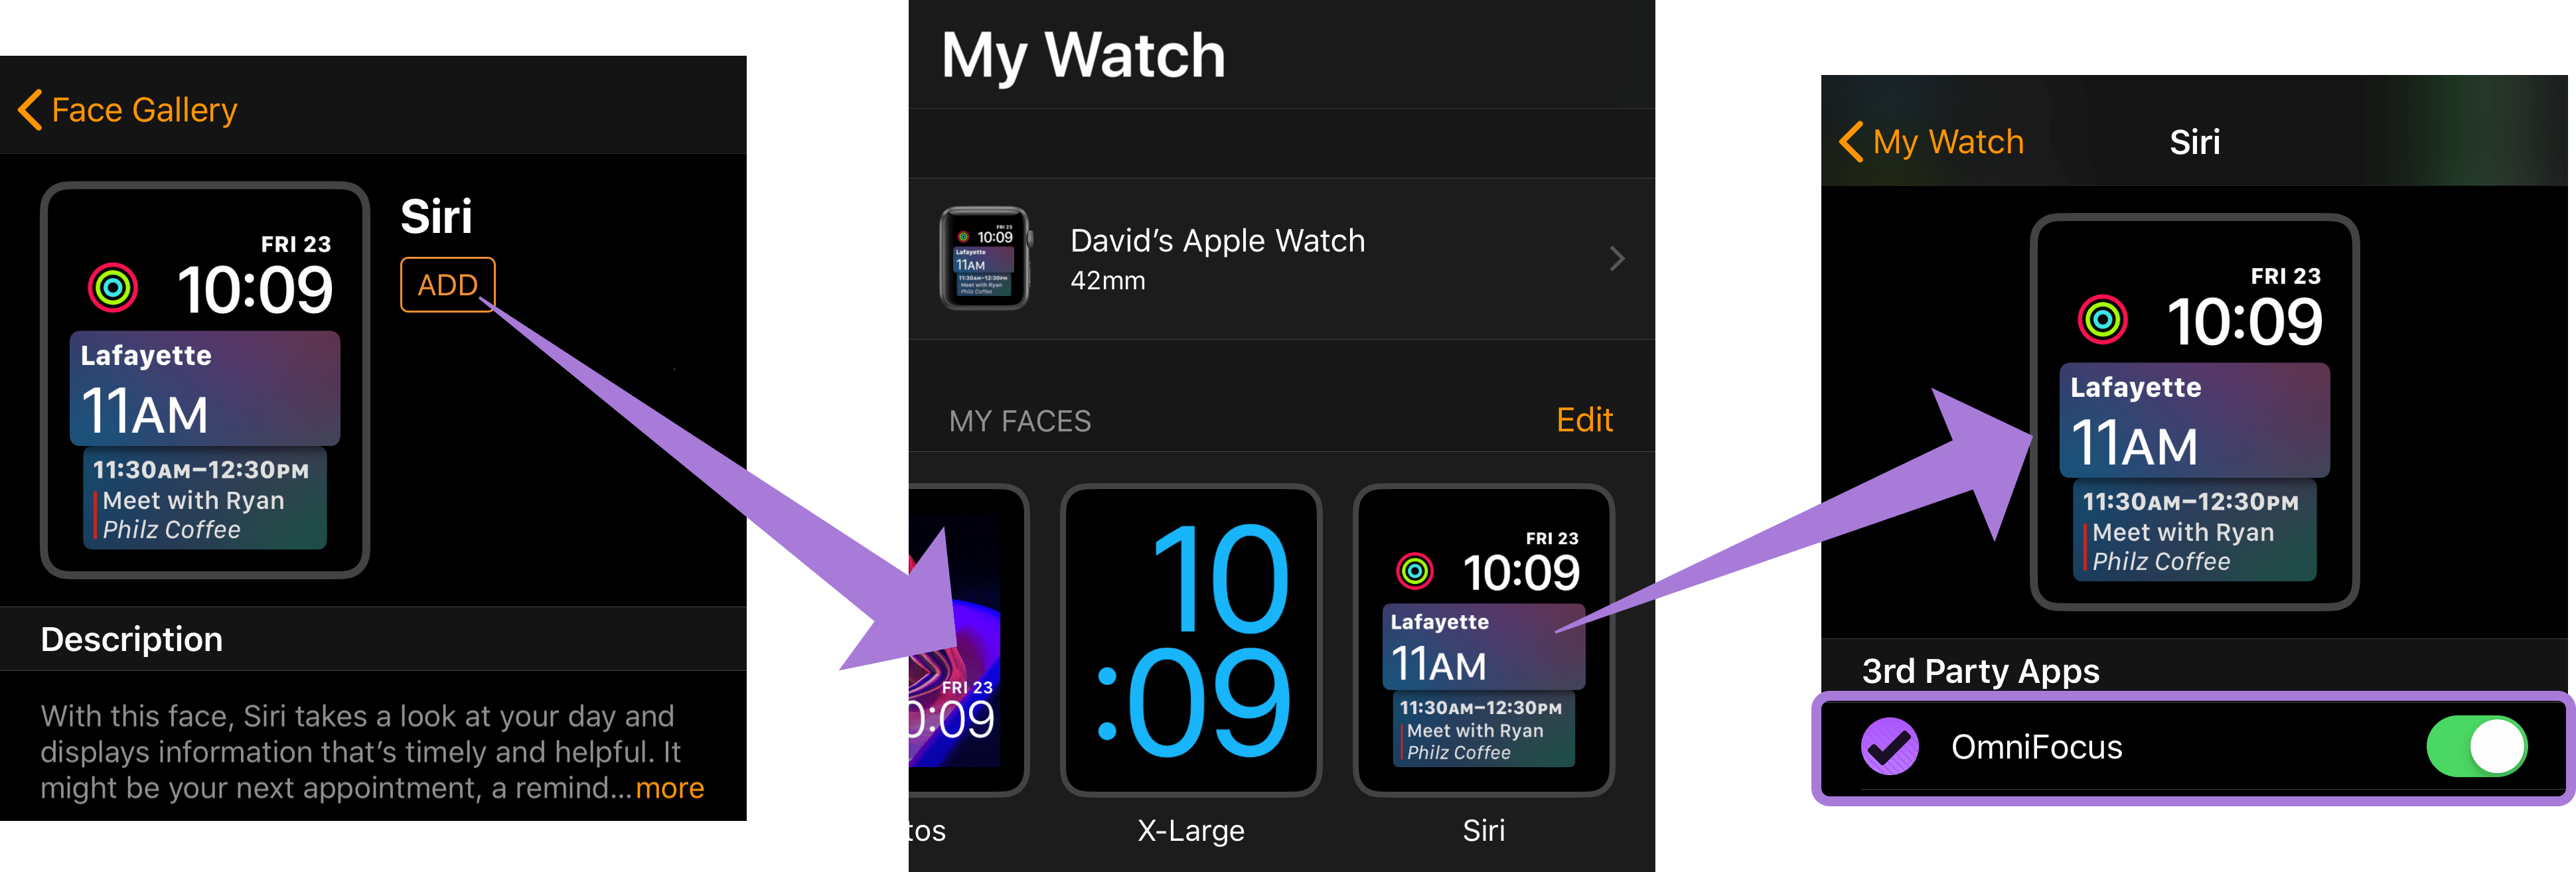 Turning on OmniFocus as a data source for Siri shortcuts on the Siri watch face of Apple Watch